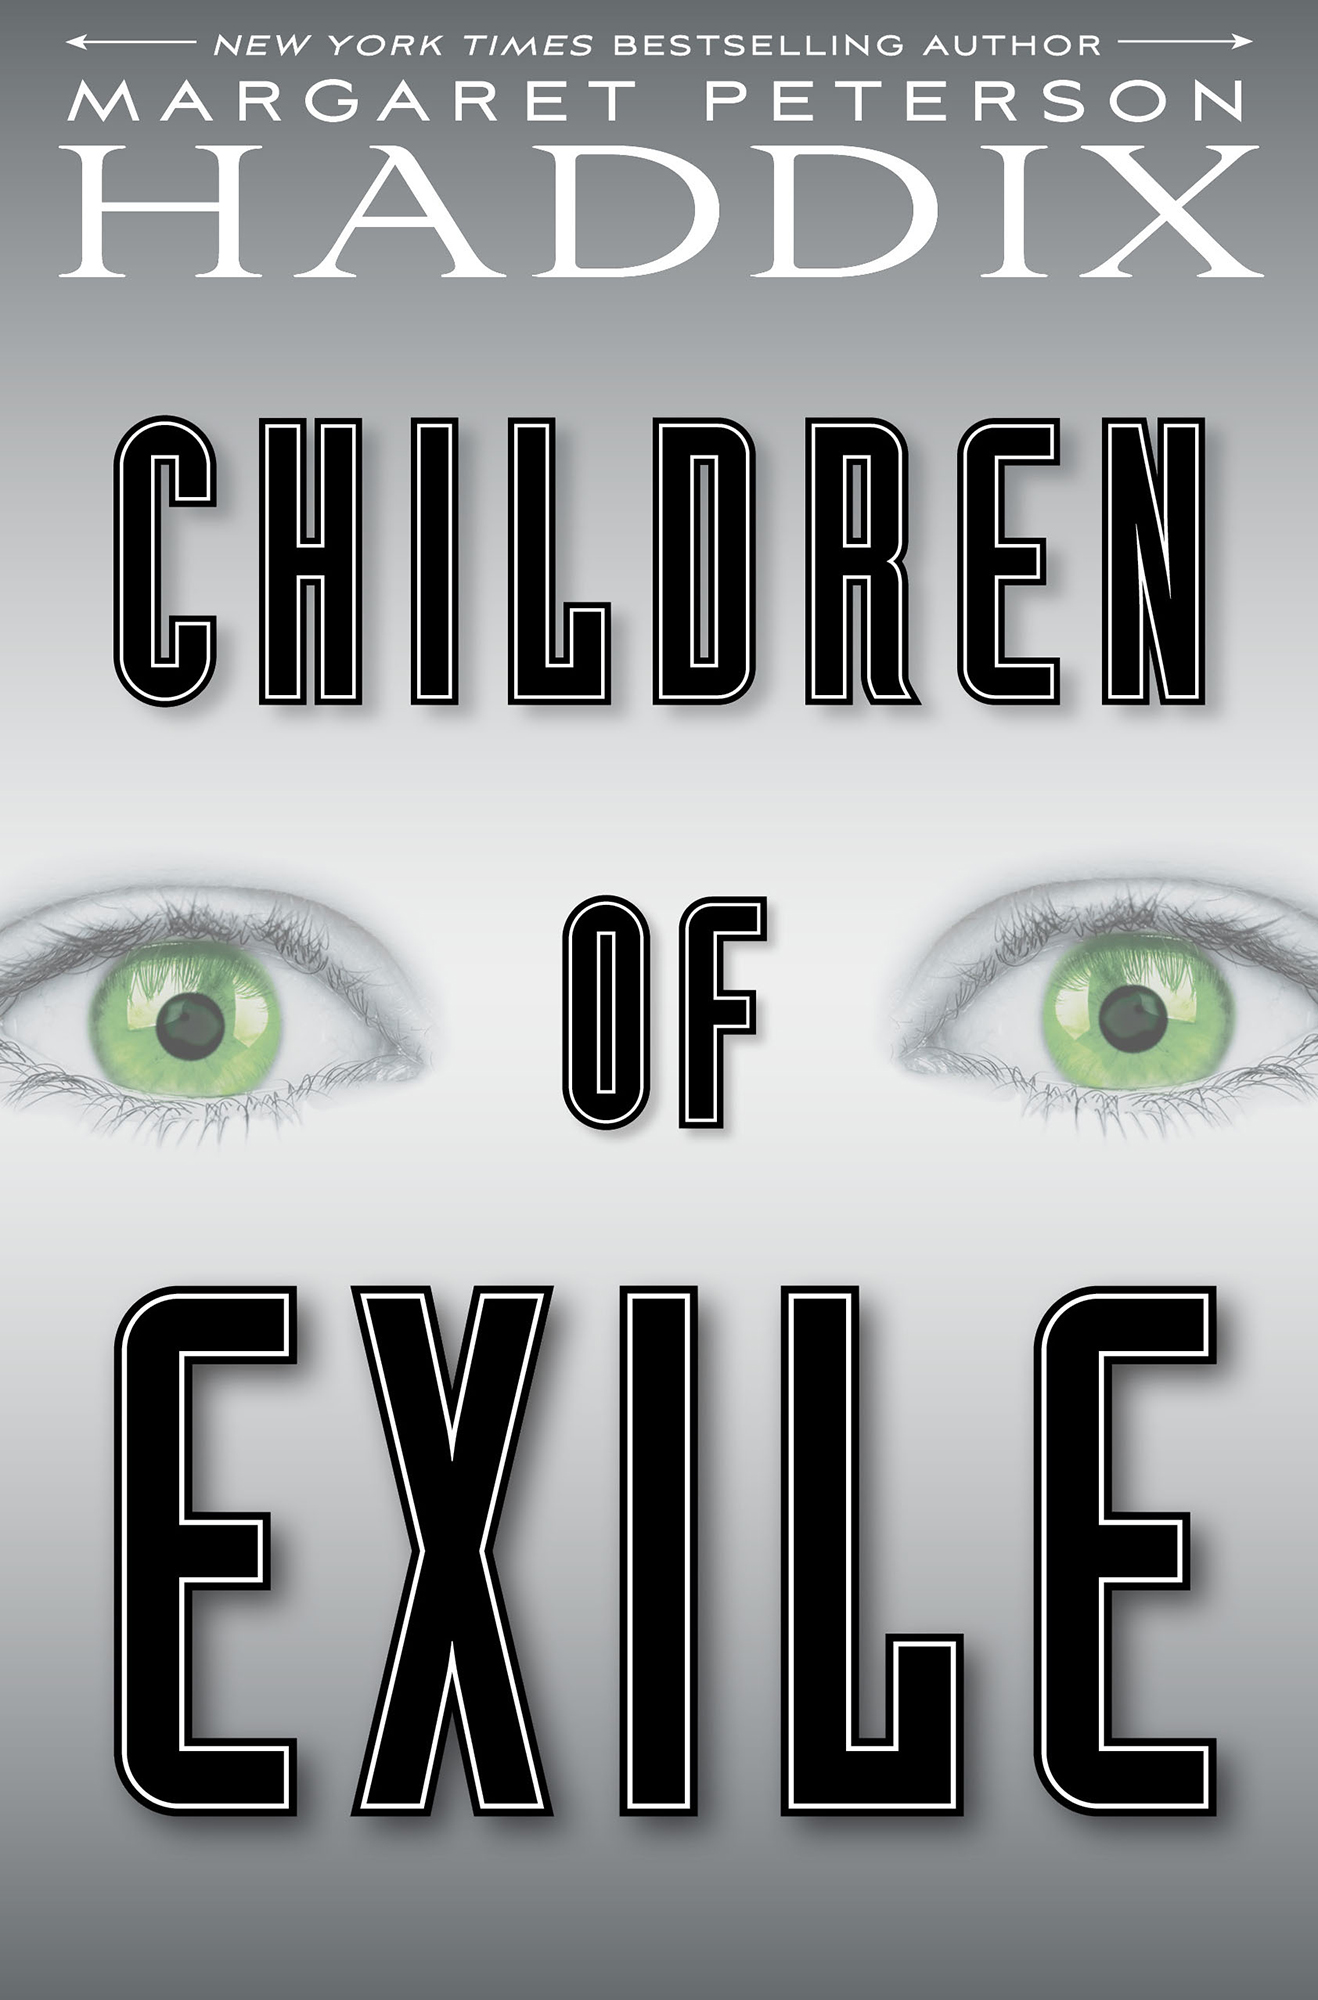 Children of Exile by Margaret Peterson Haddix